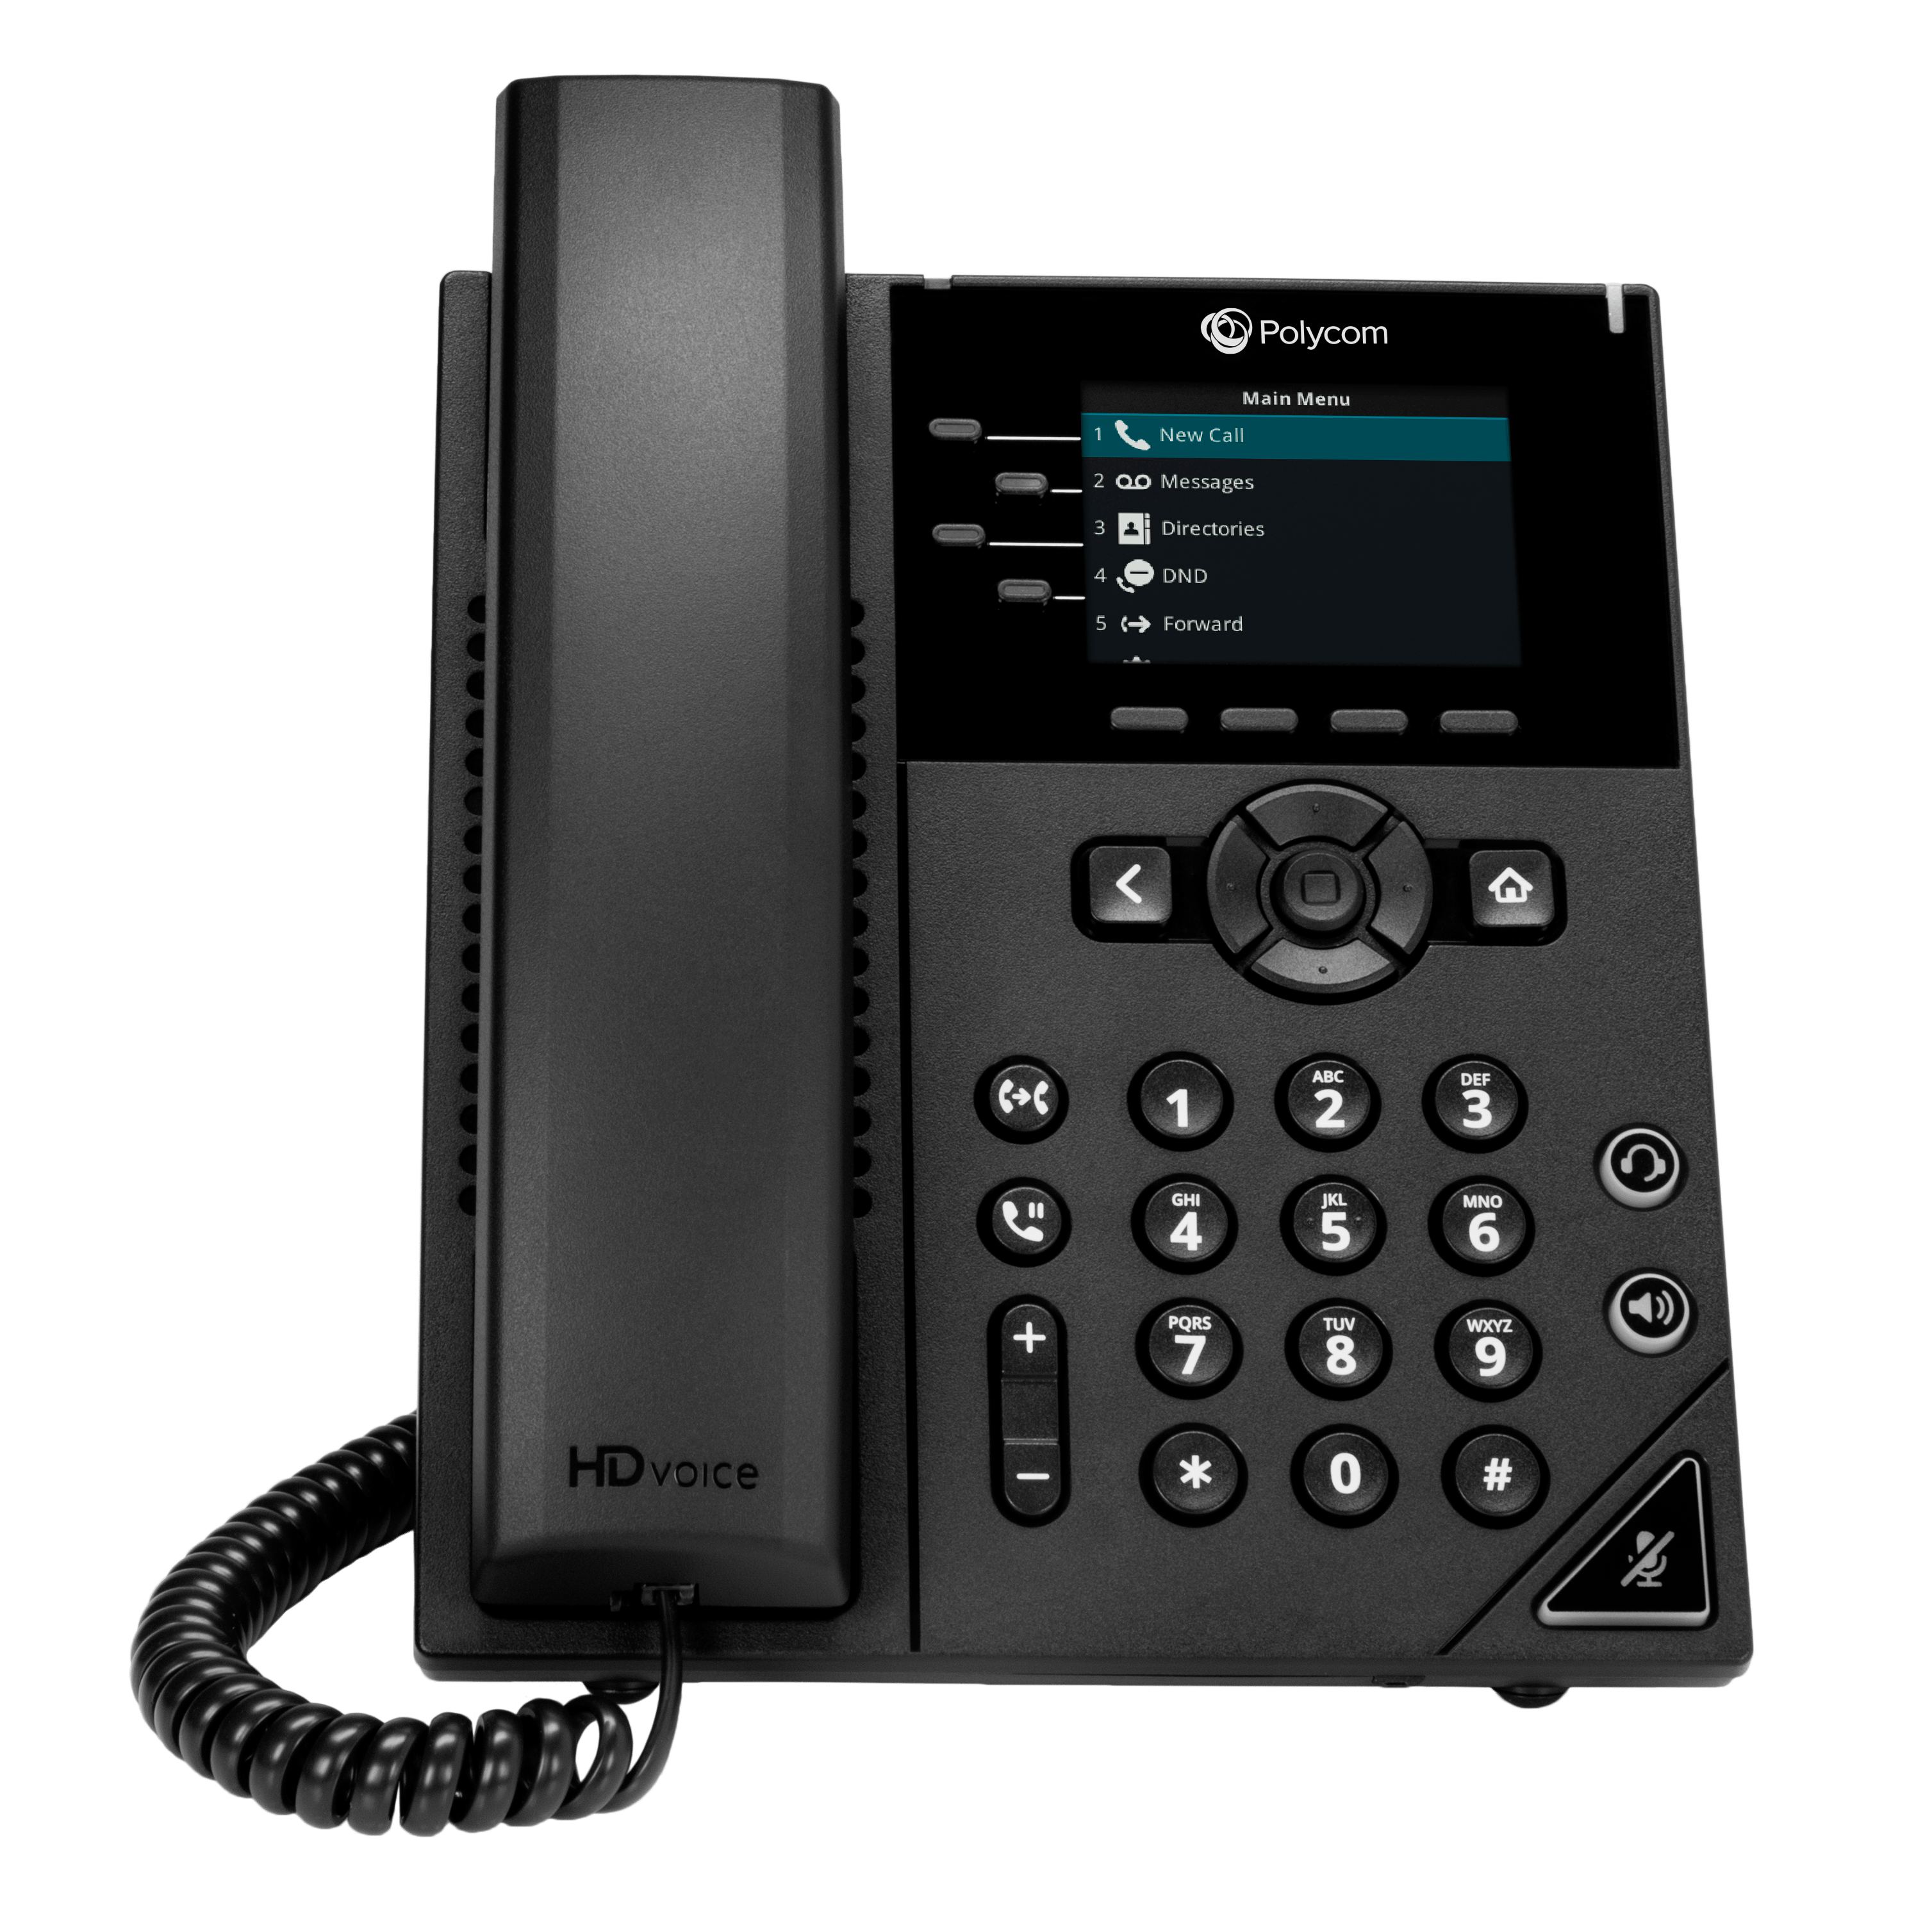 image of the Connected Voice phone